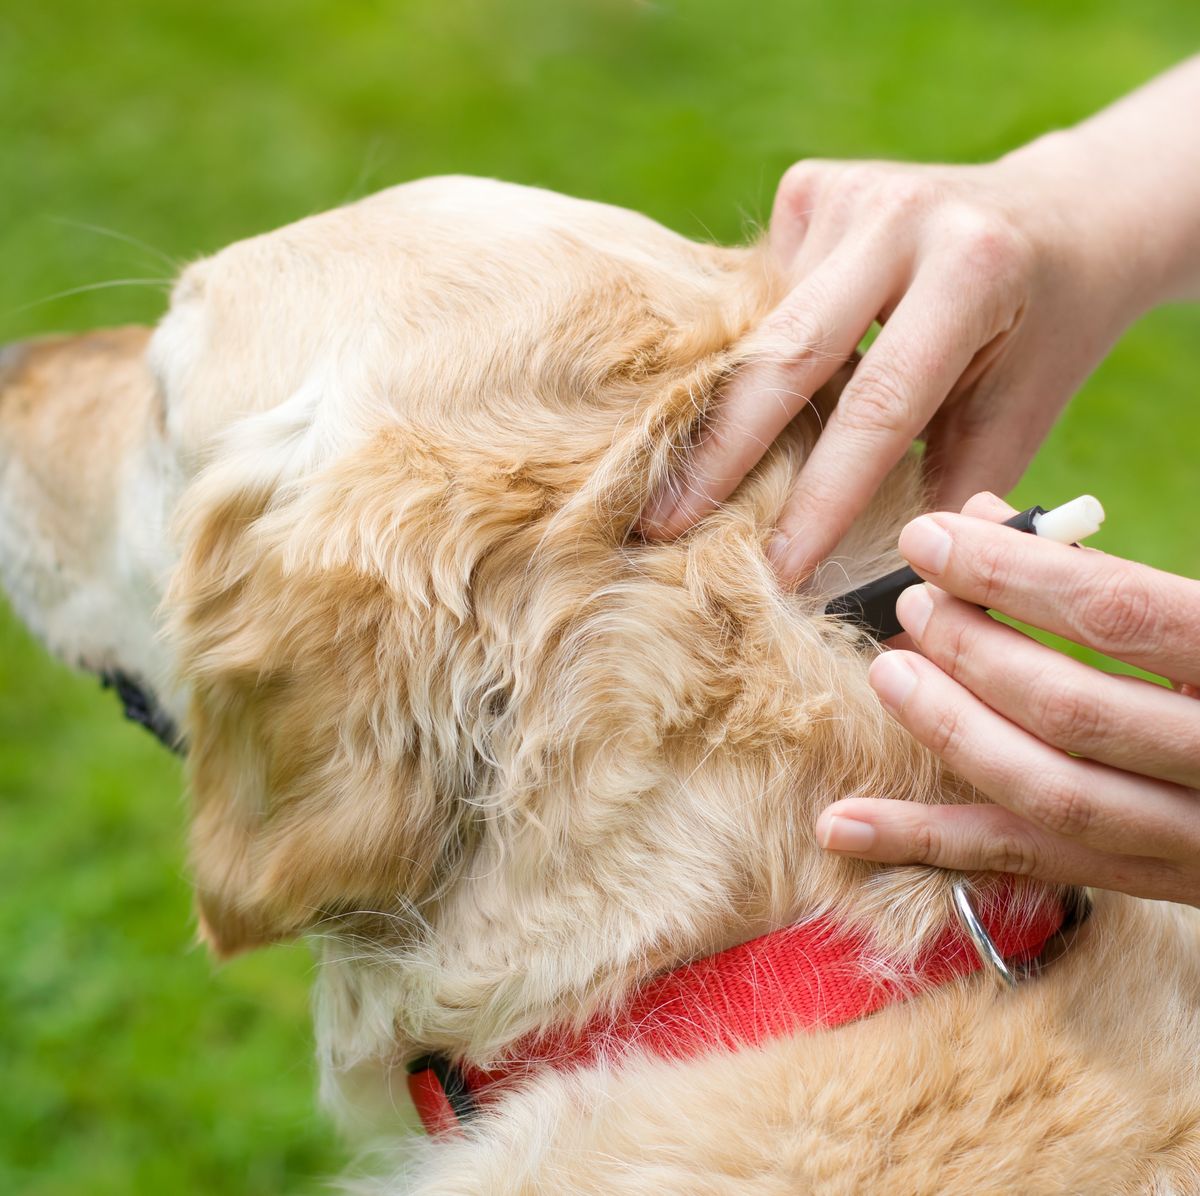 Ticks on dogs: What They Look Like and How to Get Rid of Them